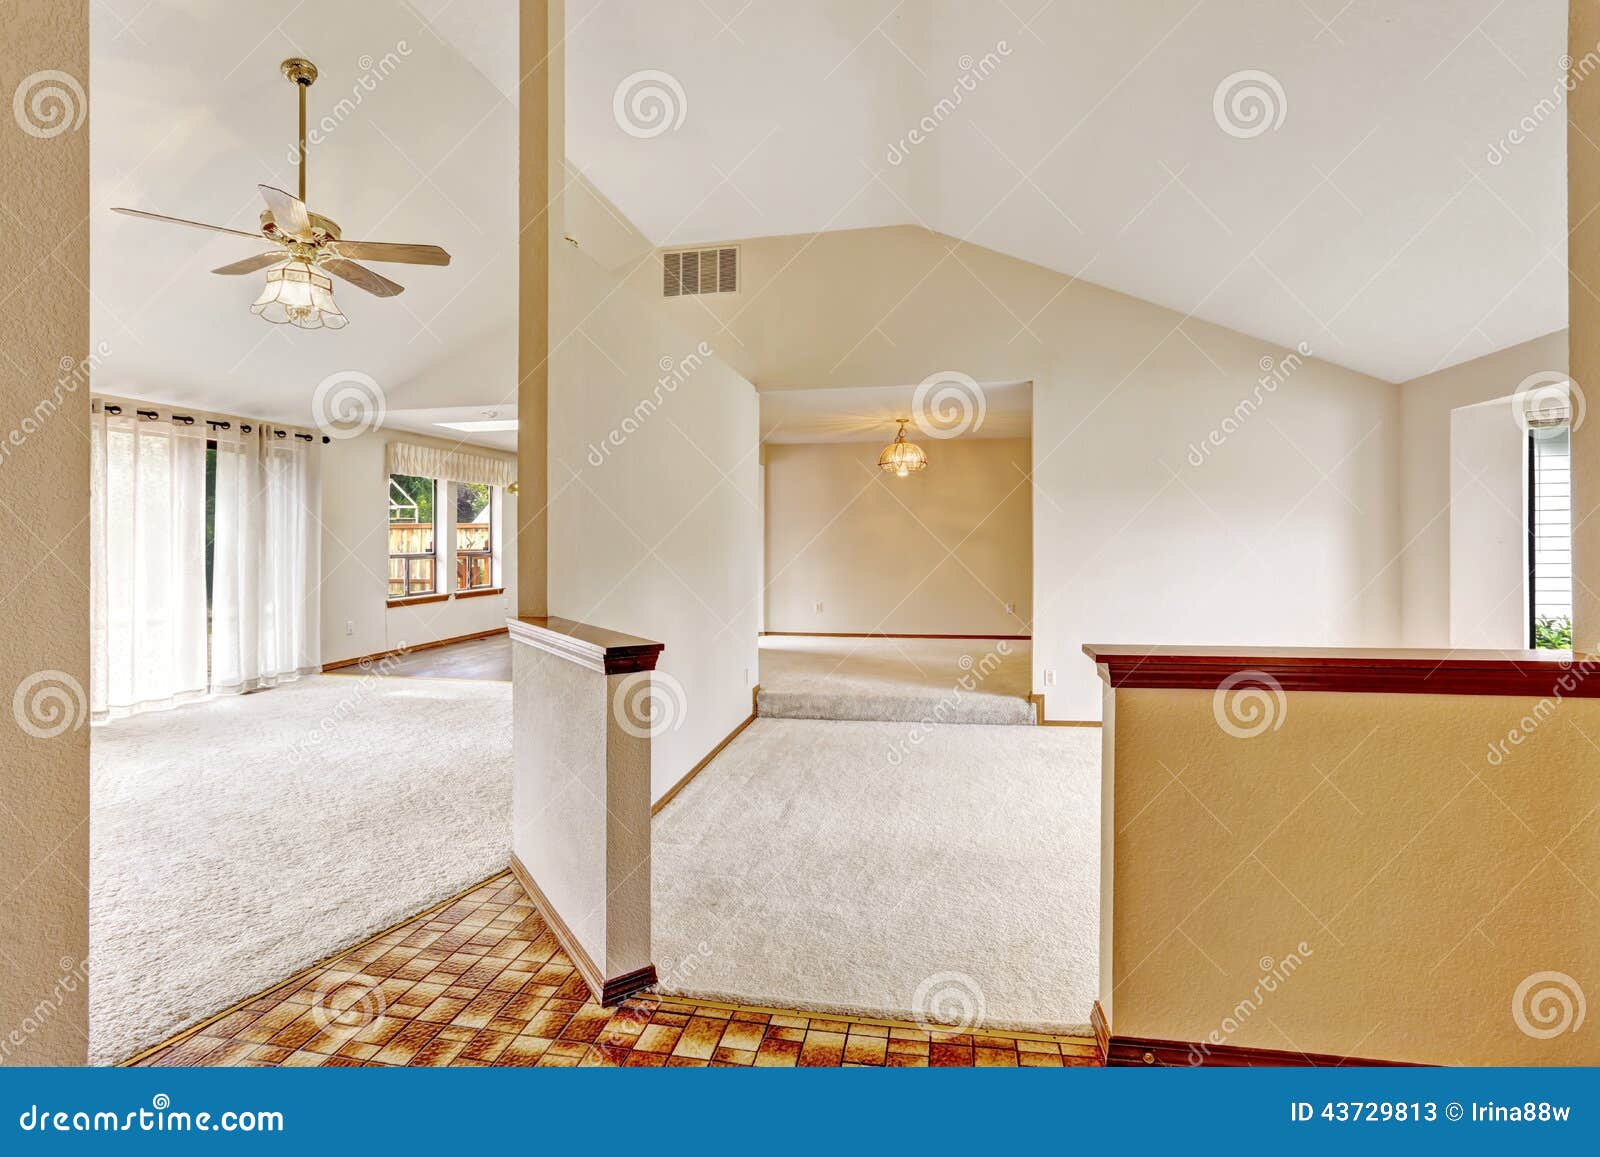 Open floor plan in empty house with vaulted ceiling and carpet floor.